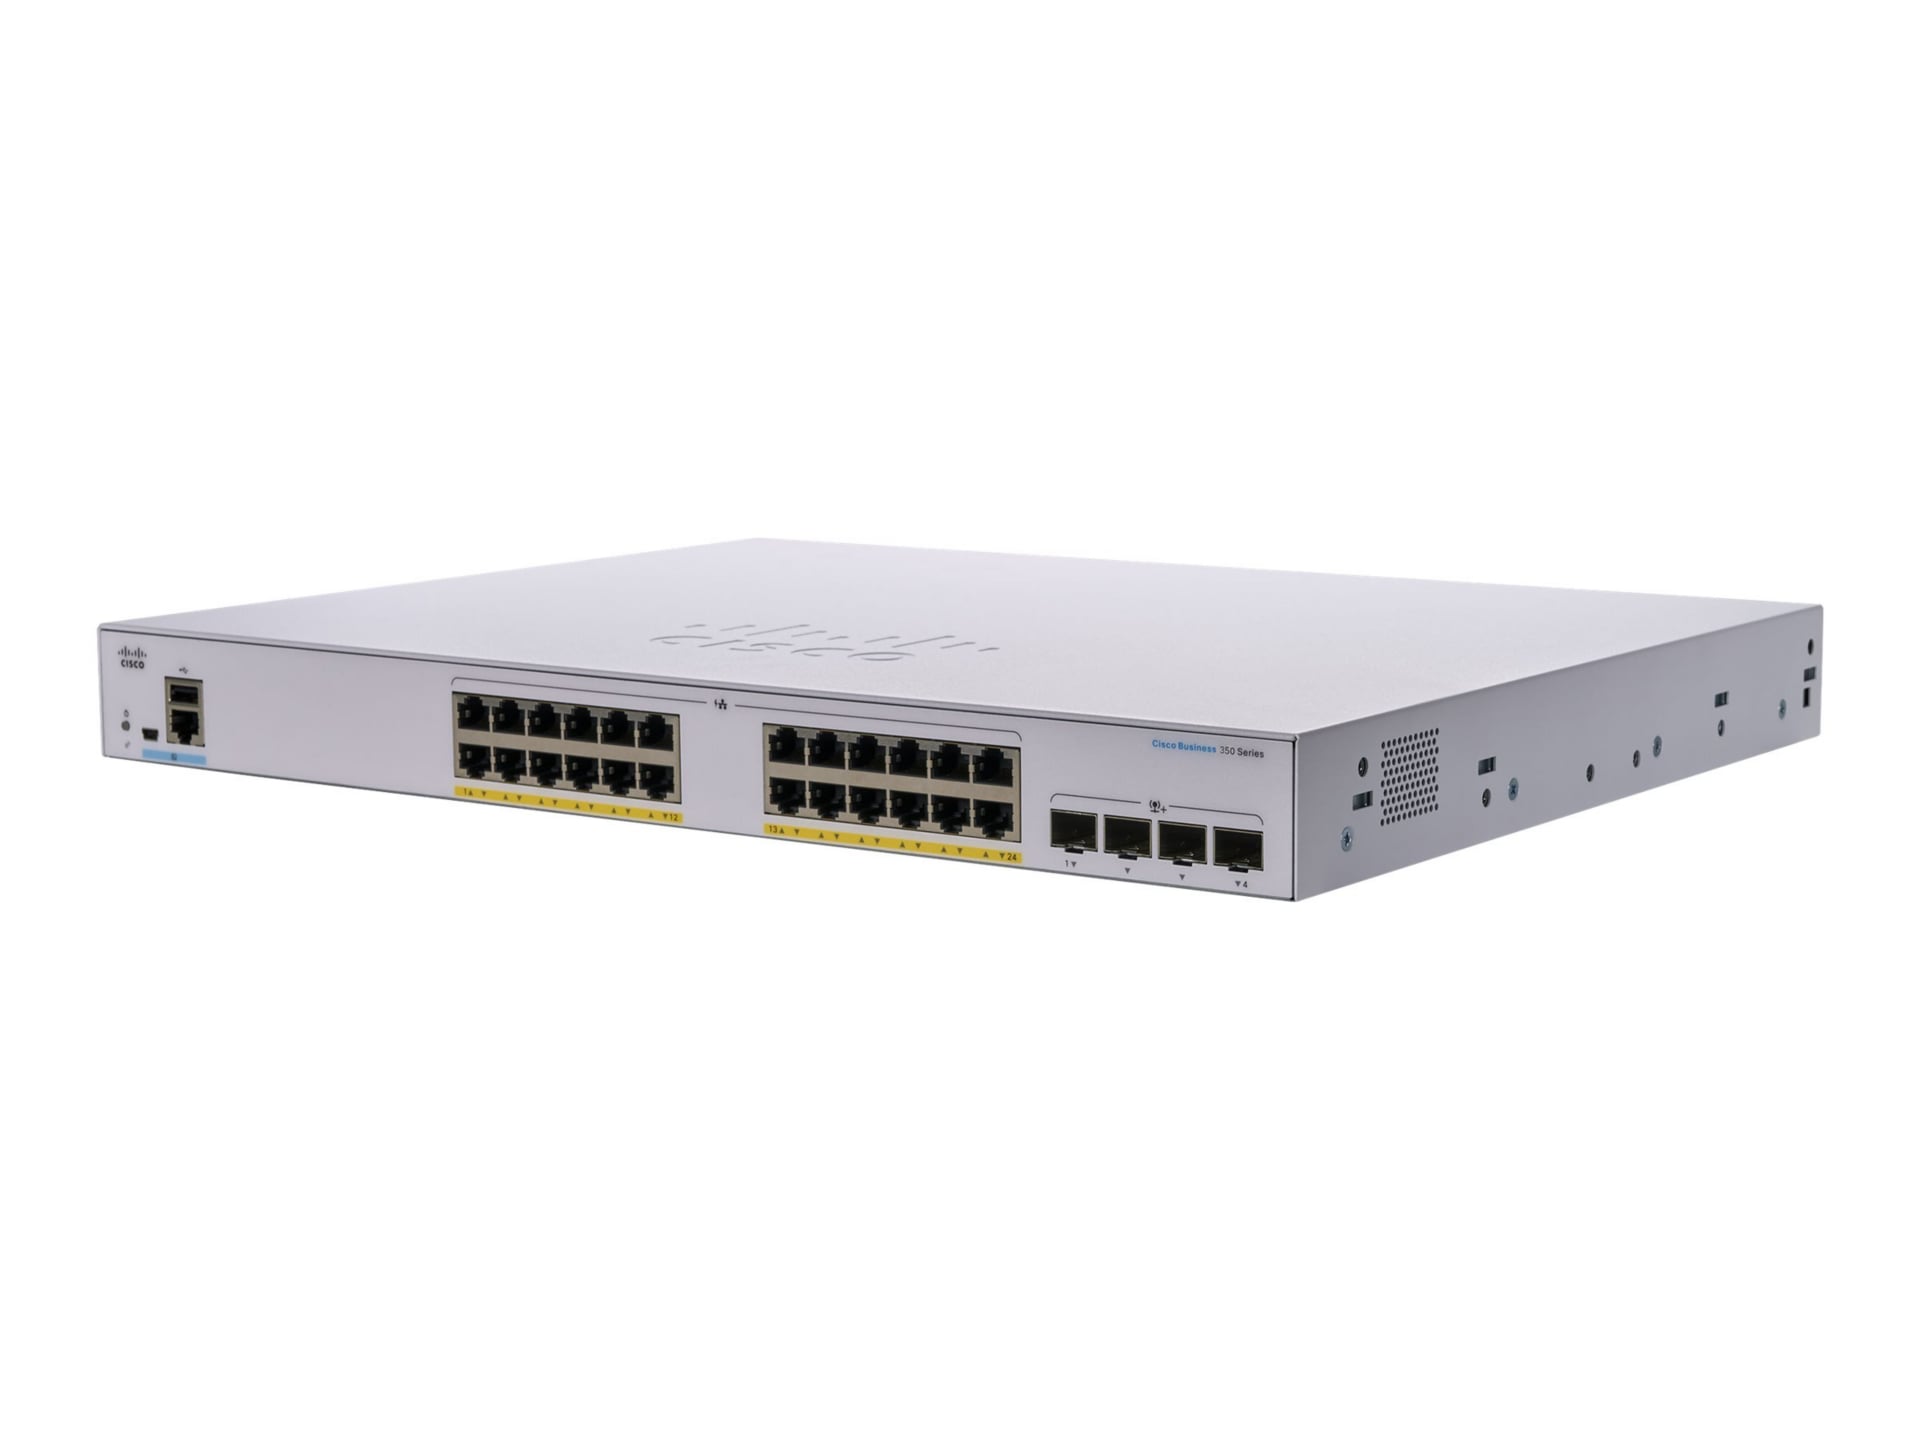 Cisco Business 350 Series 350-24FP-4X - switch - 24 ports - managed - rack-